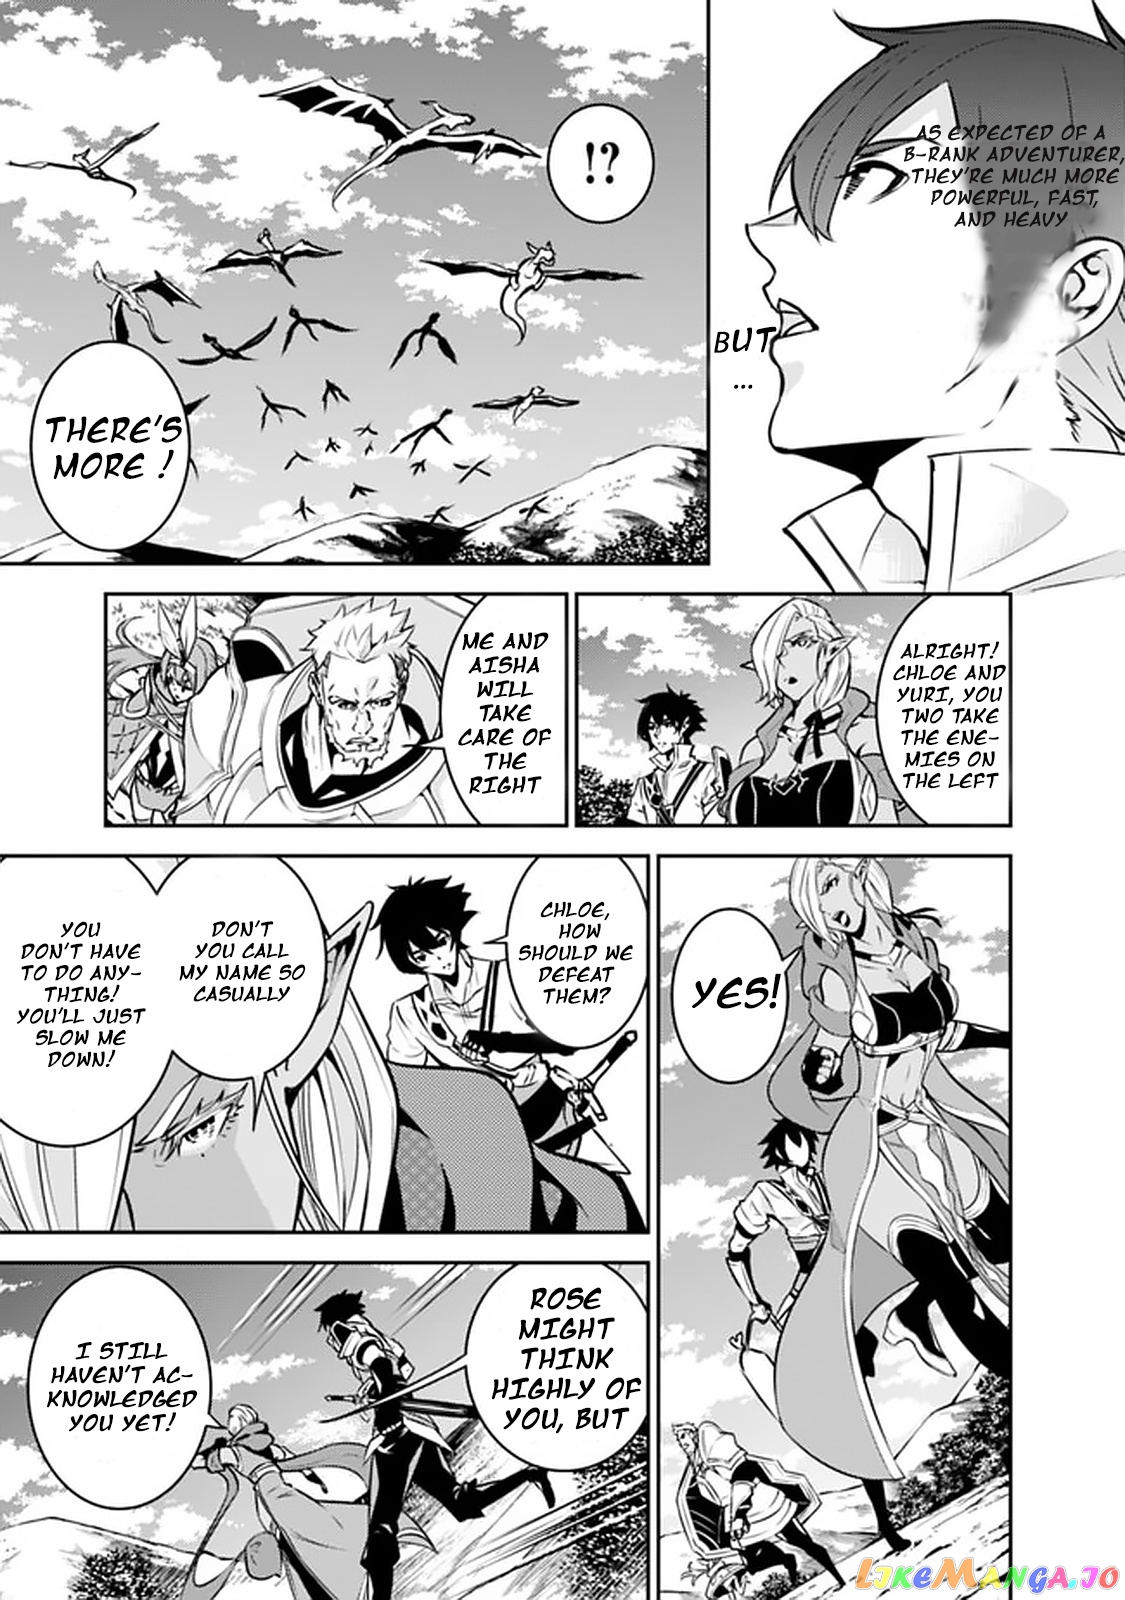 The Strongest Magical Swordsman Ever Reborn As An F-Rank Adventurer. chapter 32 - page 8